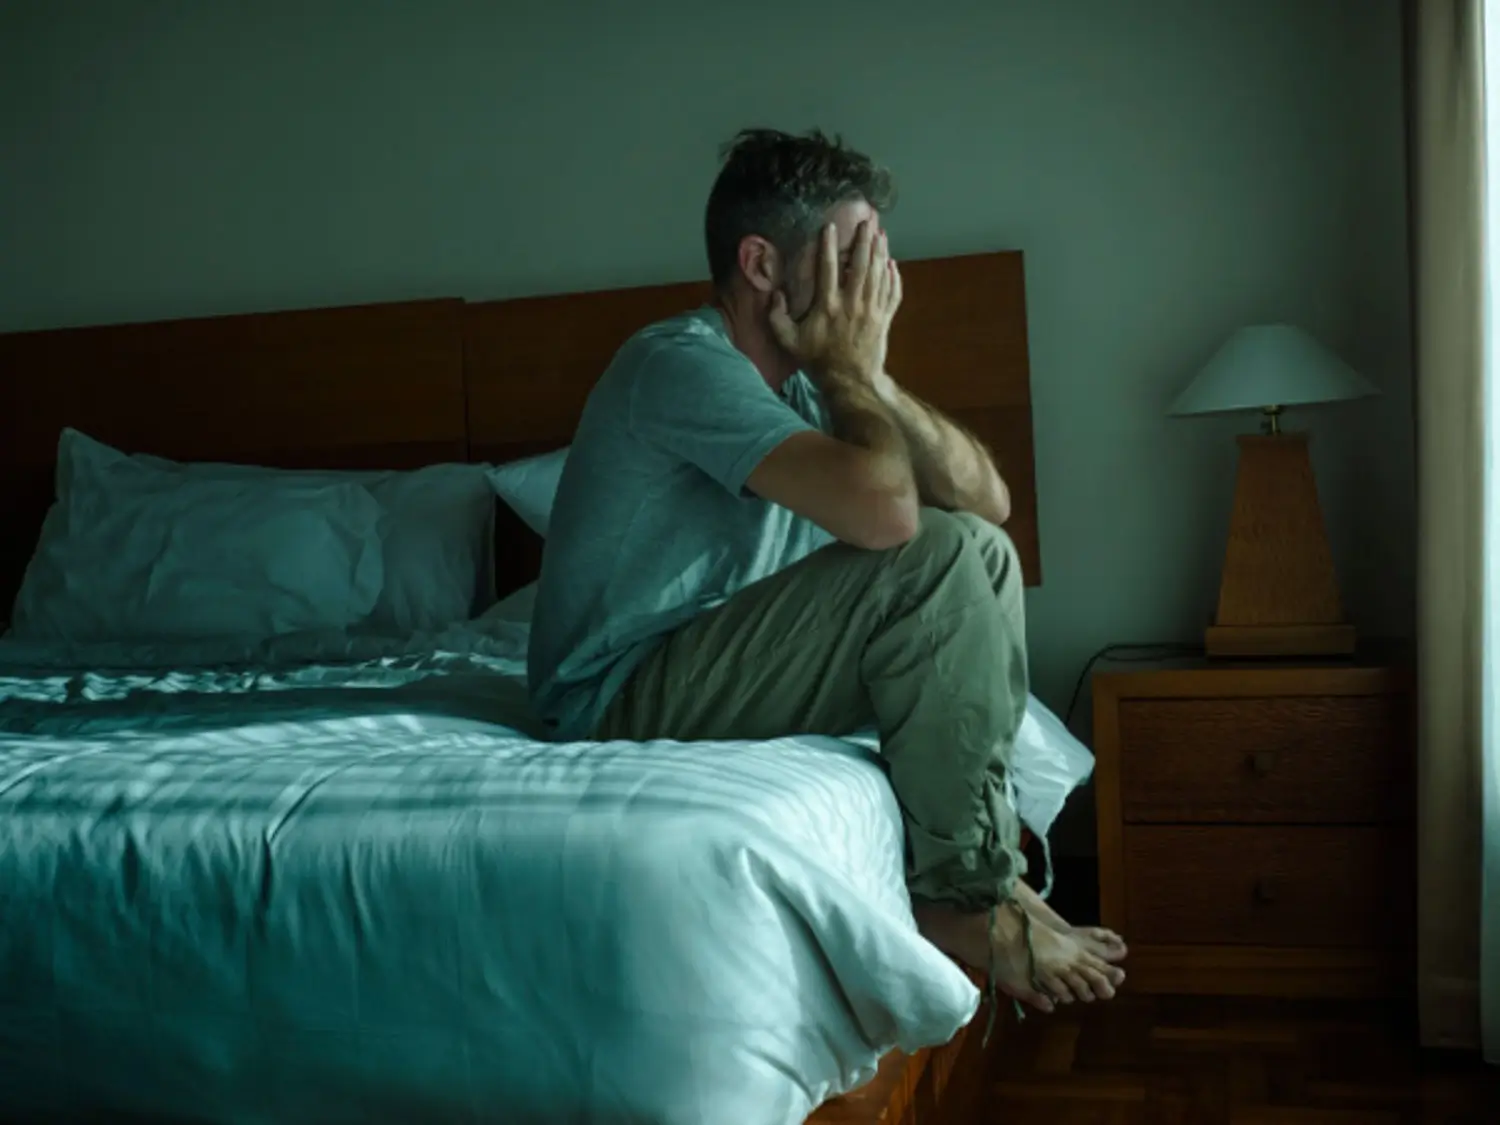 Distraught man going through alcohol withdrawal sits on the edge of his bed holding head in his hands